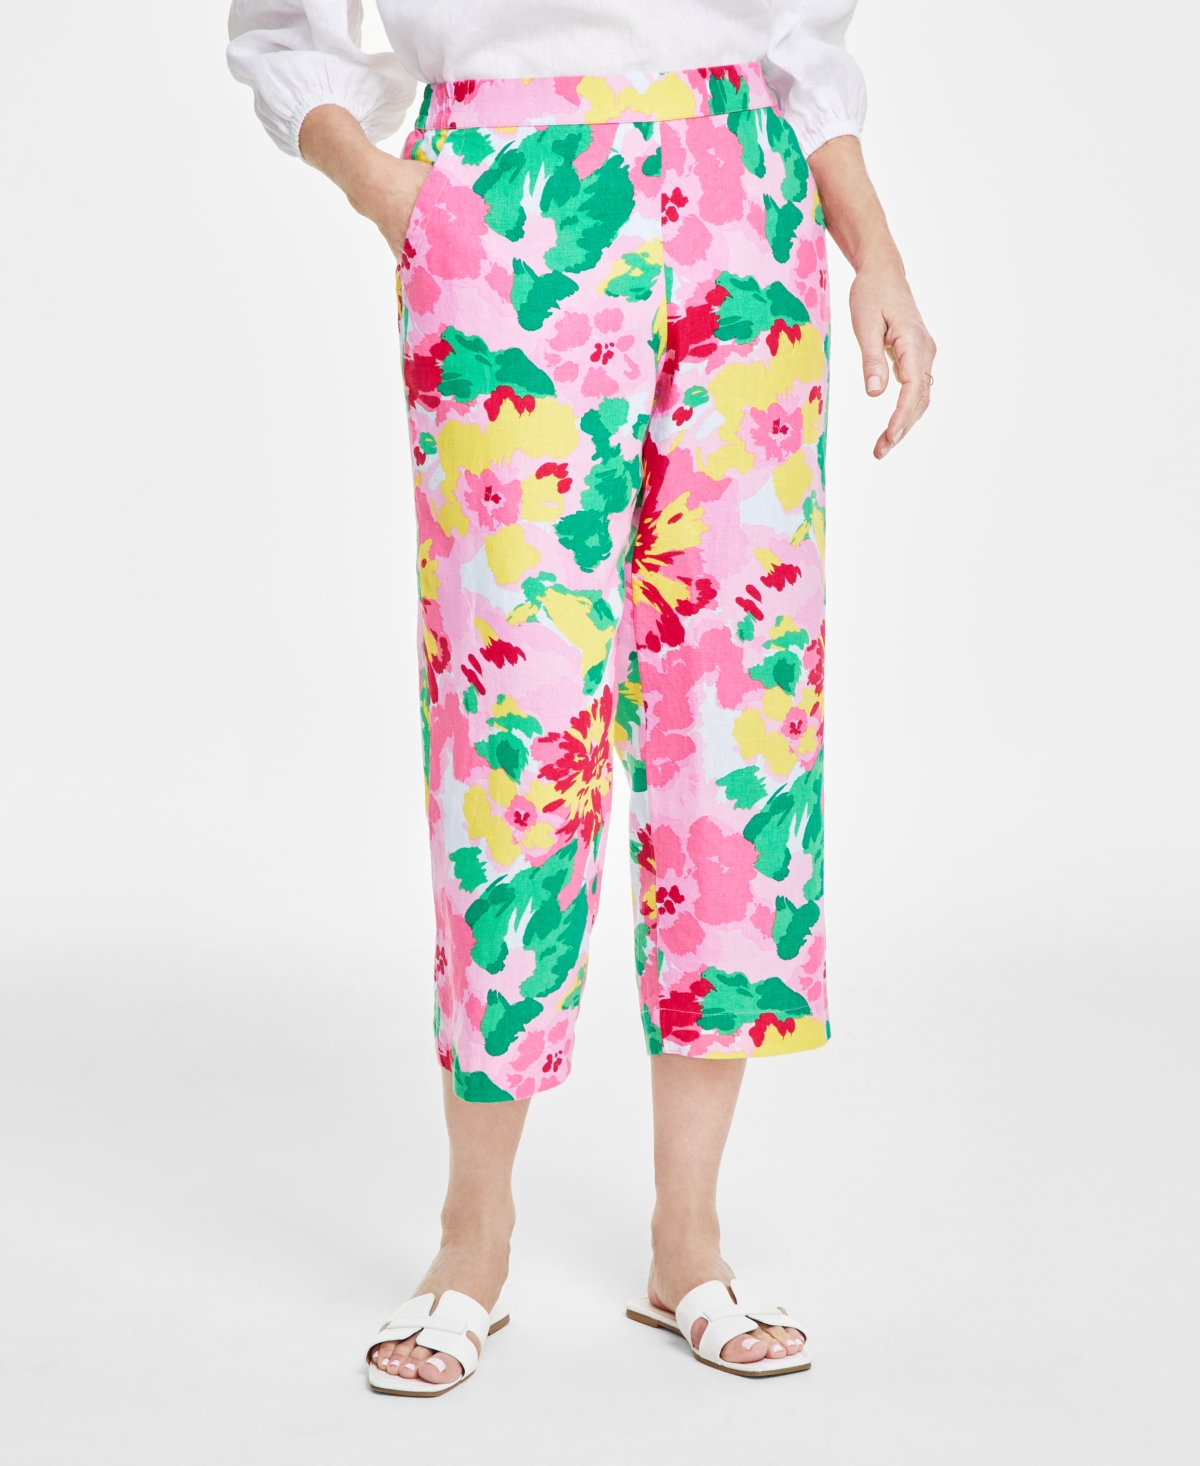 Petite 100% Linen Pull On Printed Cropped Pants, Created for Macy's - Bubble Bath Combo